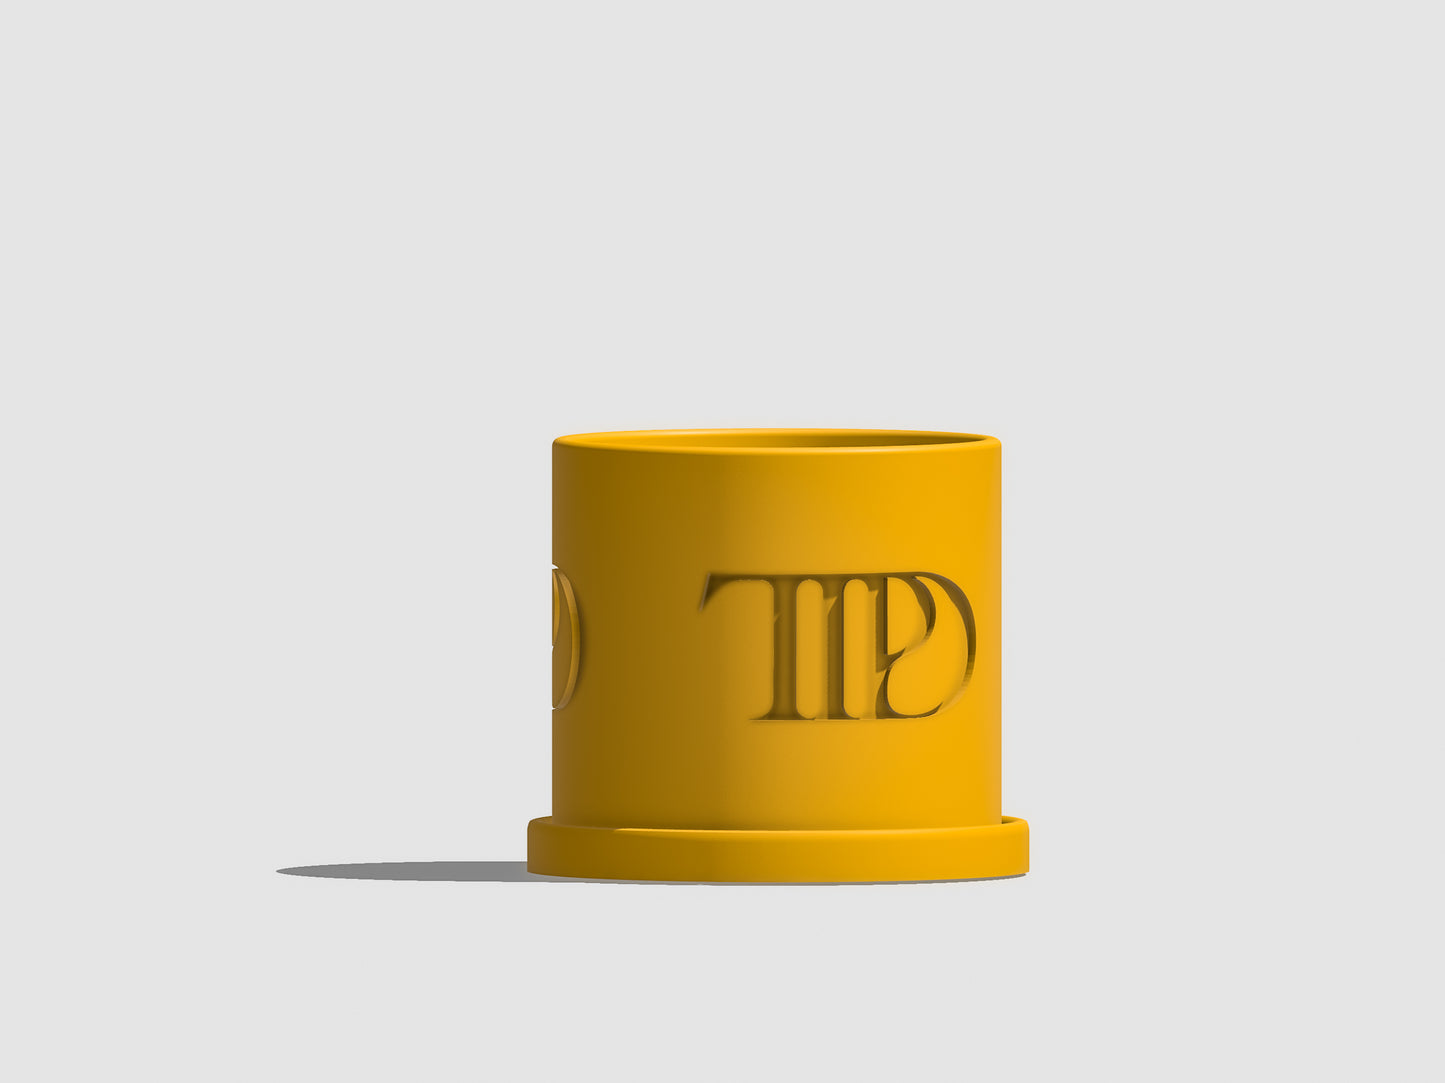 TS Plant Pot With Drainage, TTPD Merch Decor, 3D Printed Planter, Gifts for Swifties, Tortured Poets Department Home Decor